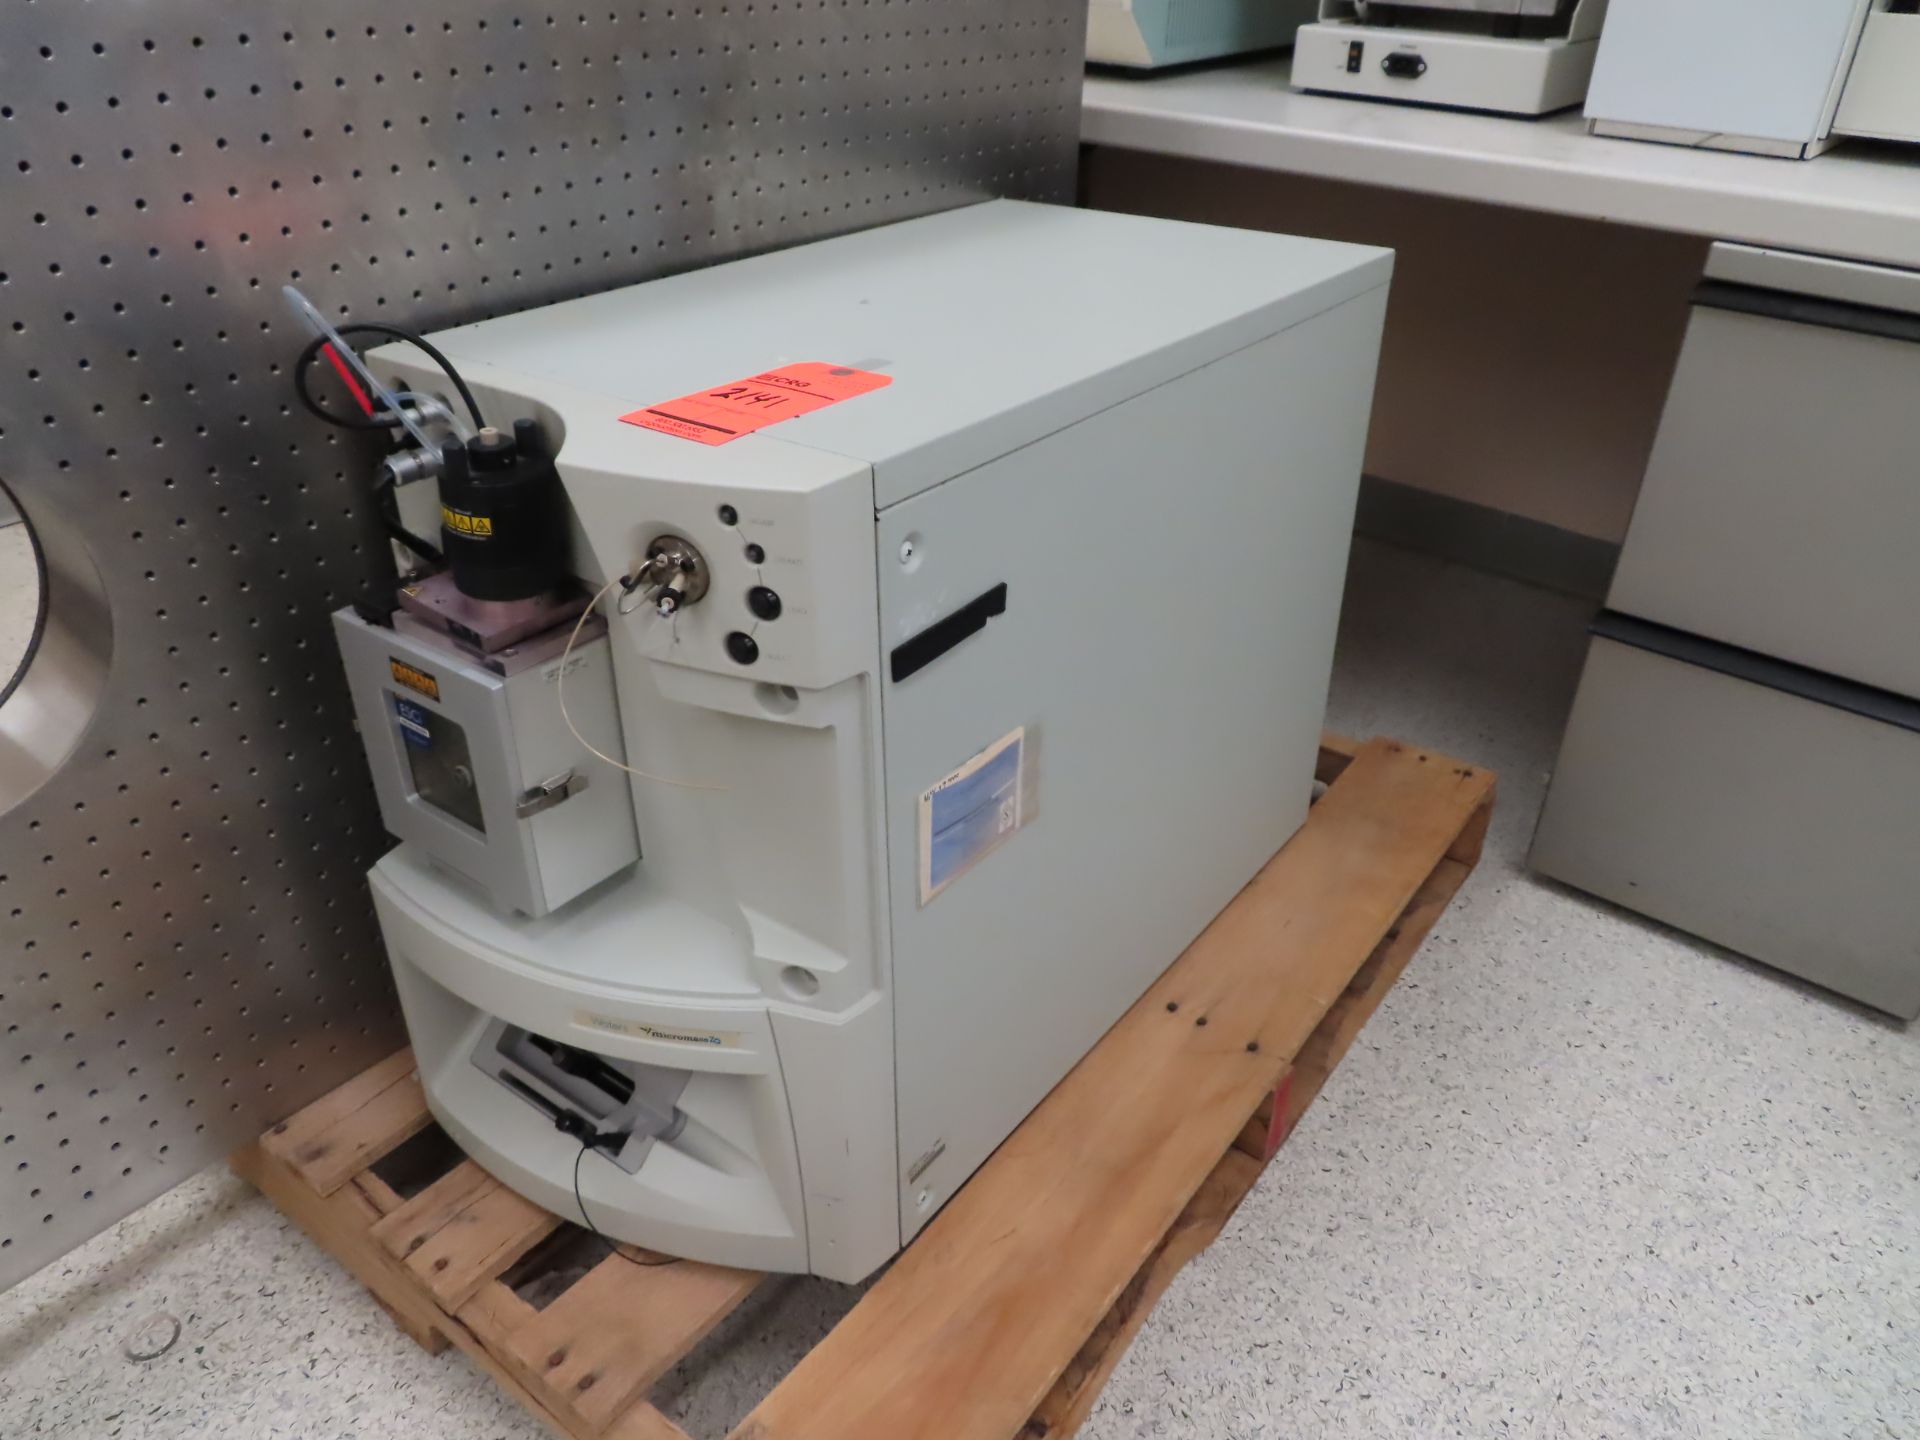 Waters Micromass 20 mass spectrometer, s/n LAA835, located in D wing, 3rd floor, room at end of